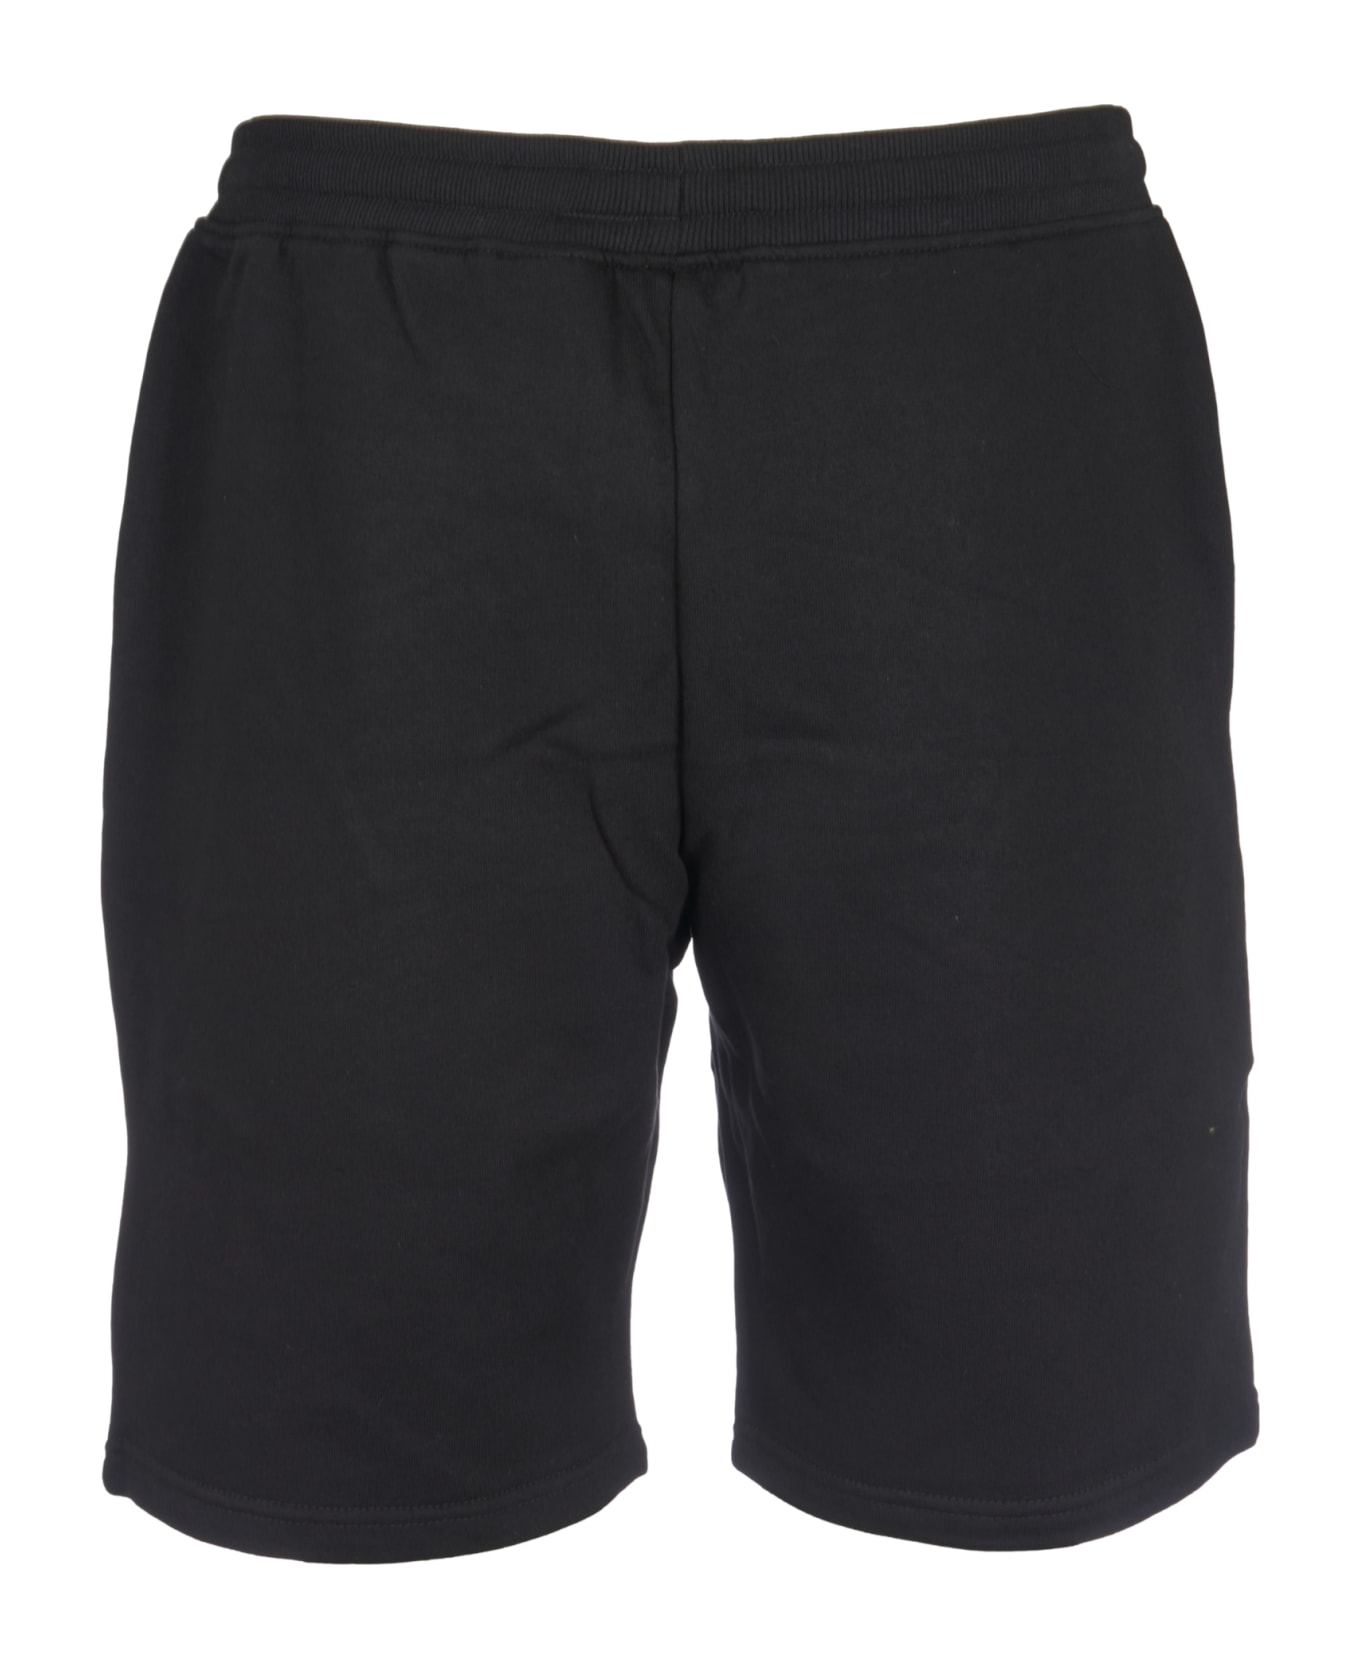 The North Face Laced Track Shorts - Black